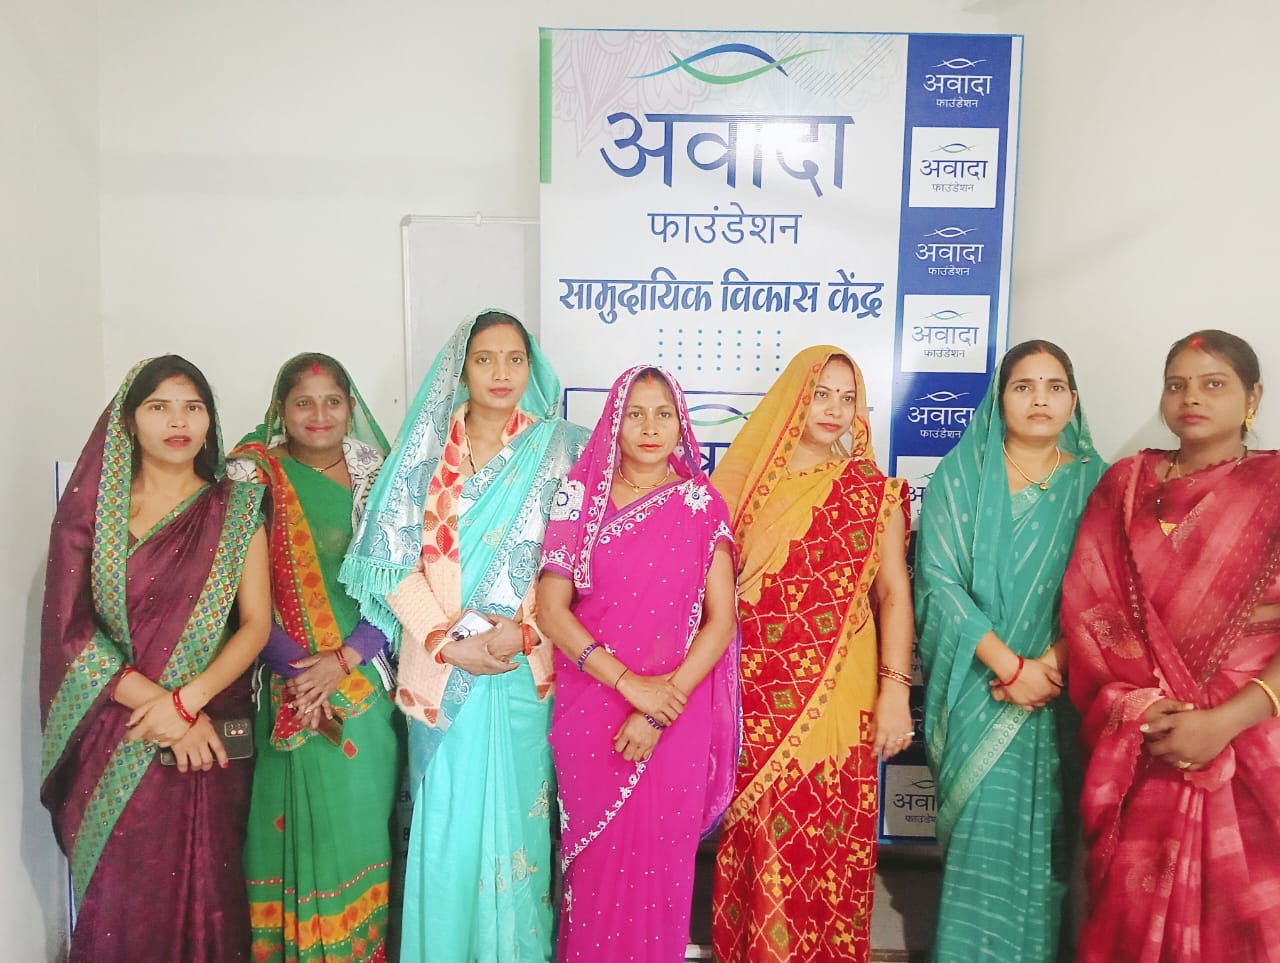 Empowering Homemakers: Avaada Foundation’s Collaboration with Telecom Organizations Creates Income Opportunities for Housewives of Jayapur, Varanasi